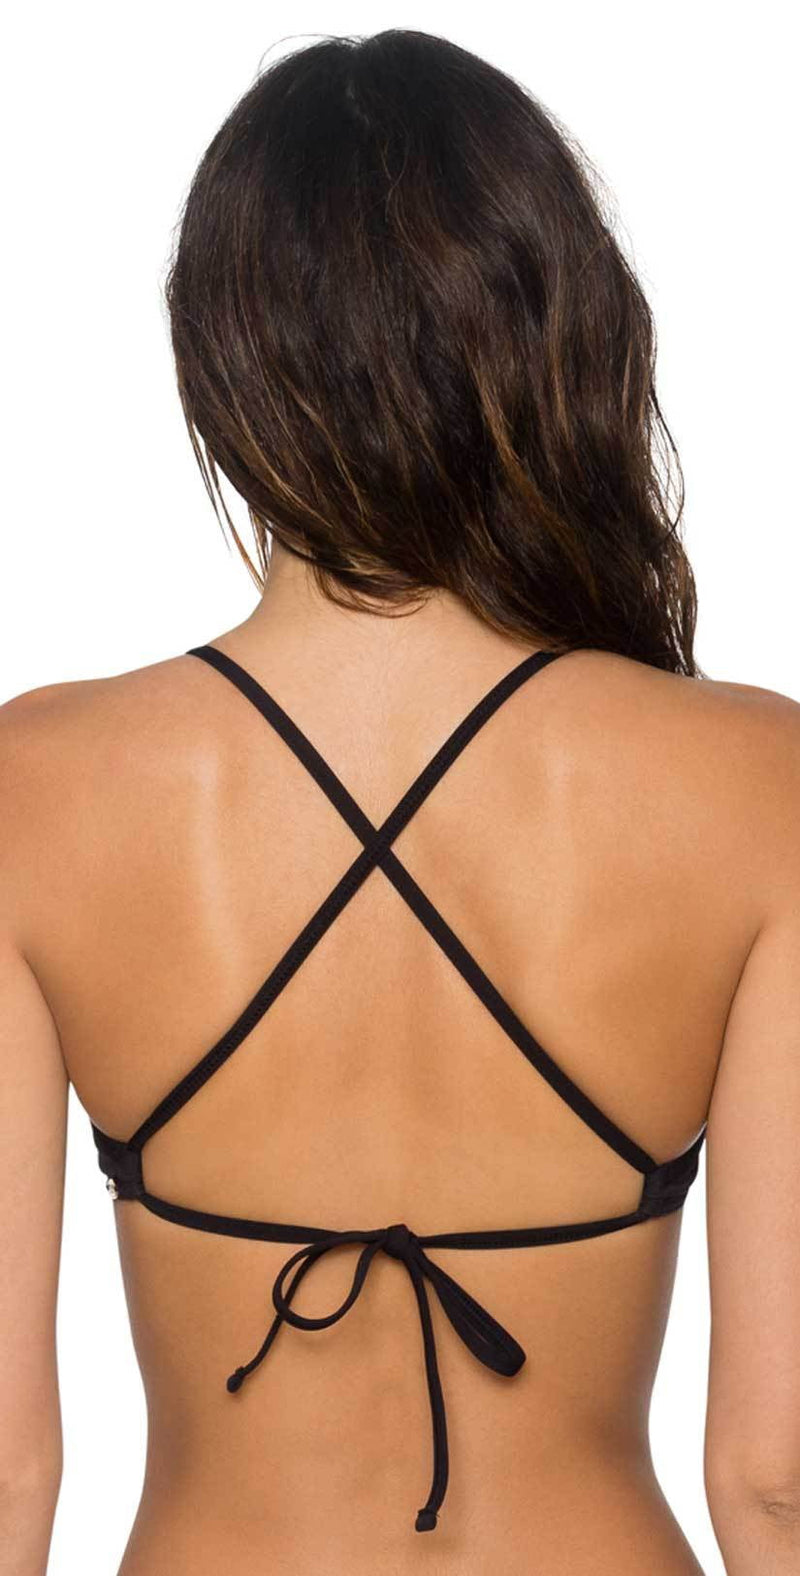 Sunsets Jayne X-Back Underwire Top in Black 60T-BLCK: